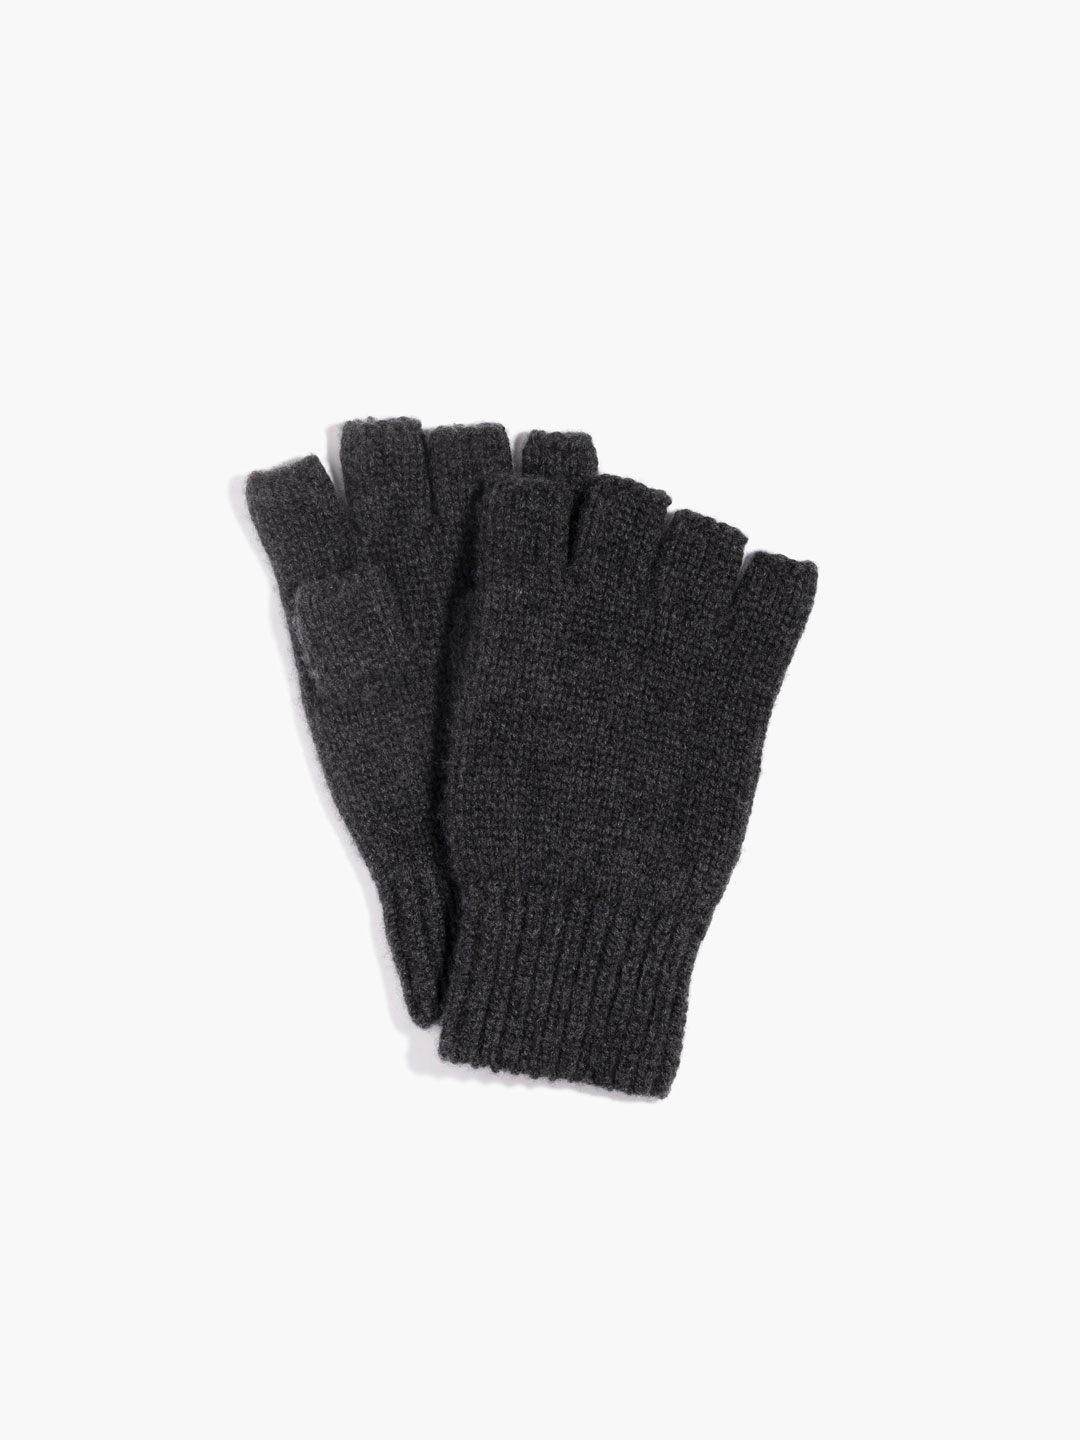 Gloves - Charcoal